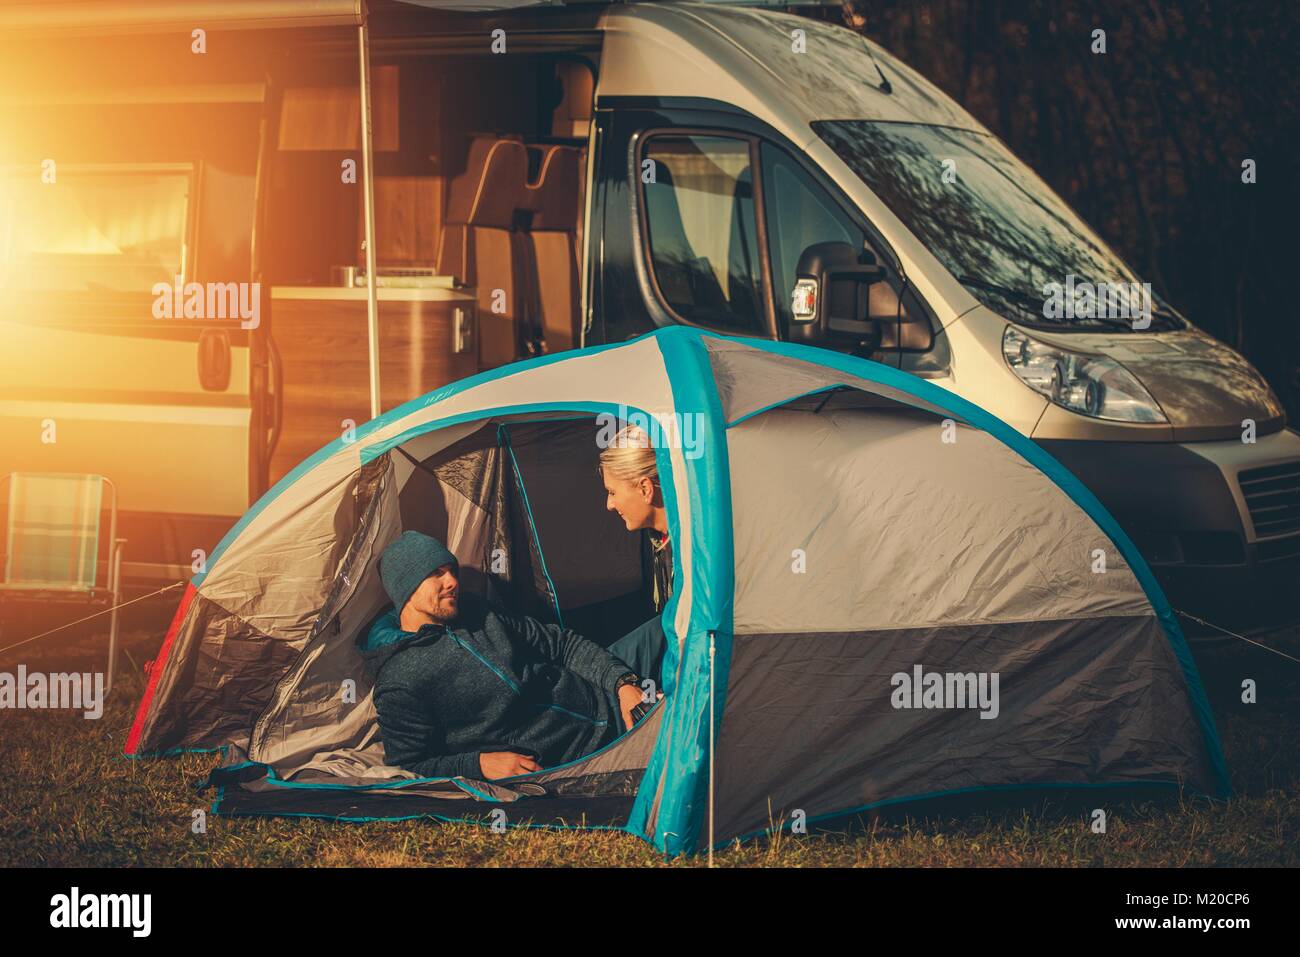 Romantic Tent and RV Camping Spot. Caucasian Couple Having Fun Far From the City. Stock Photo